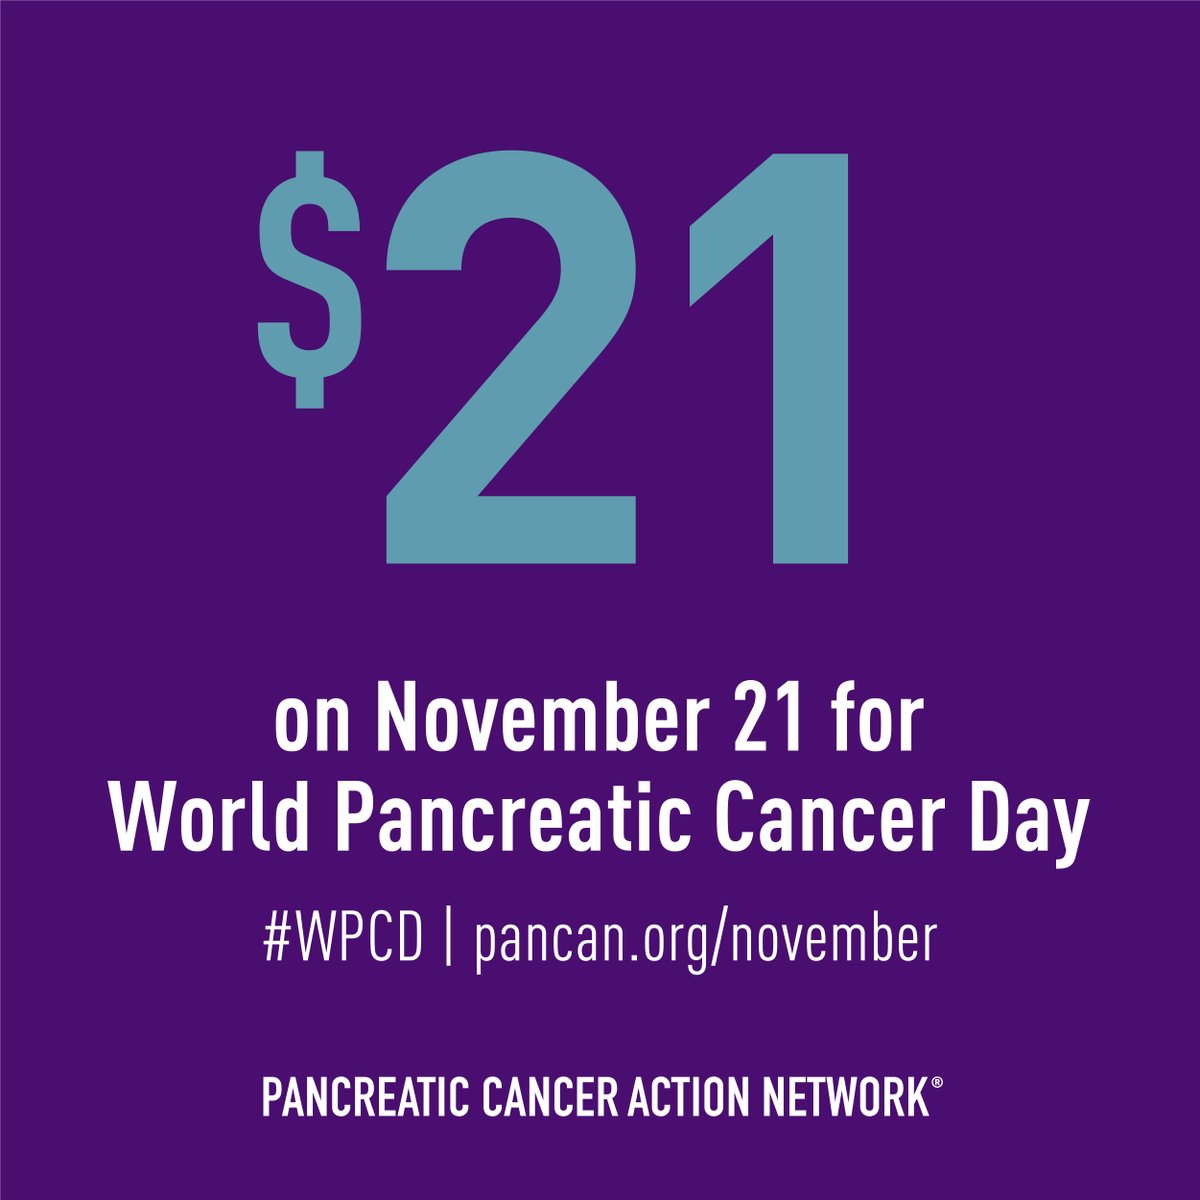 Be a part of the movement to end #pancreaticcancer. Donate $21 on November 21 in honor of #WPCD. #PANCaware pcan.at/aqsmg8